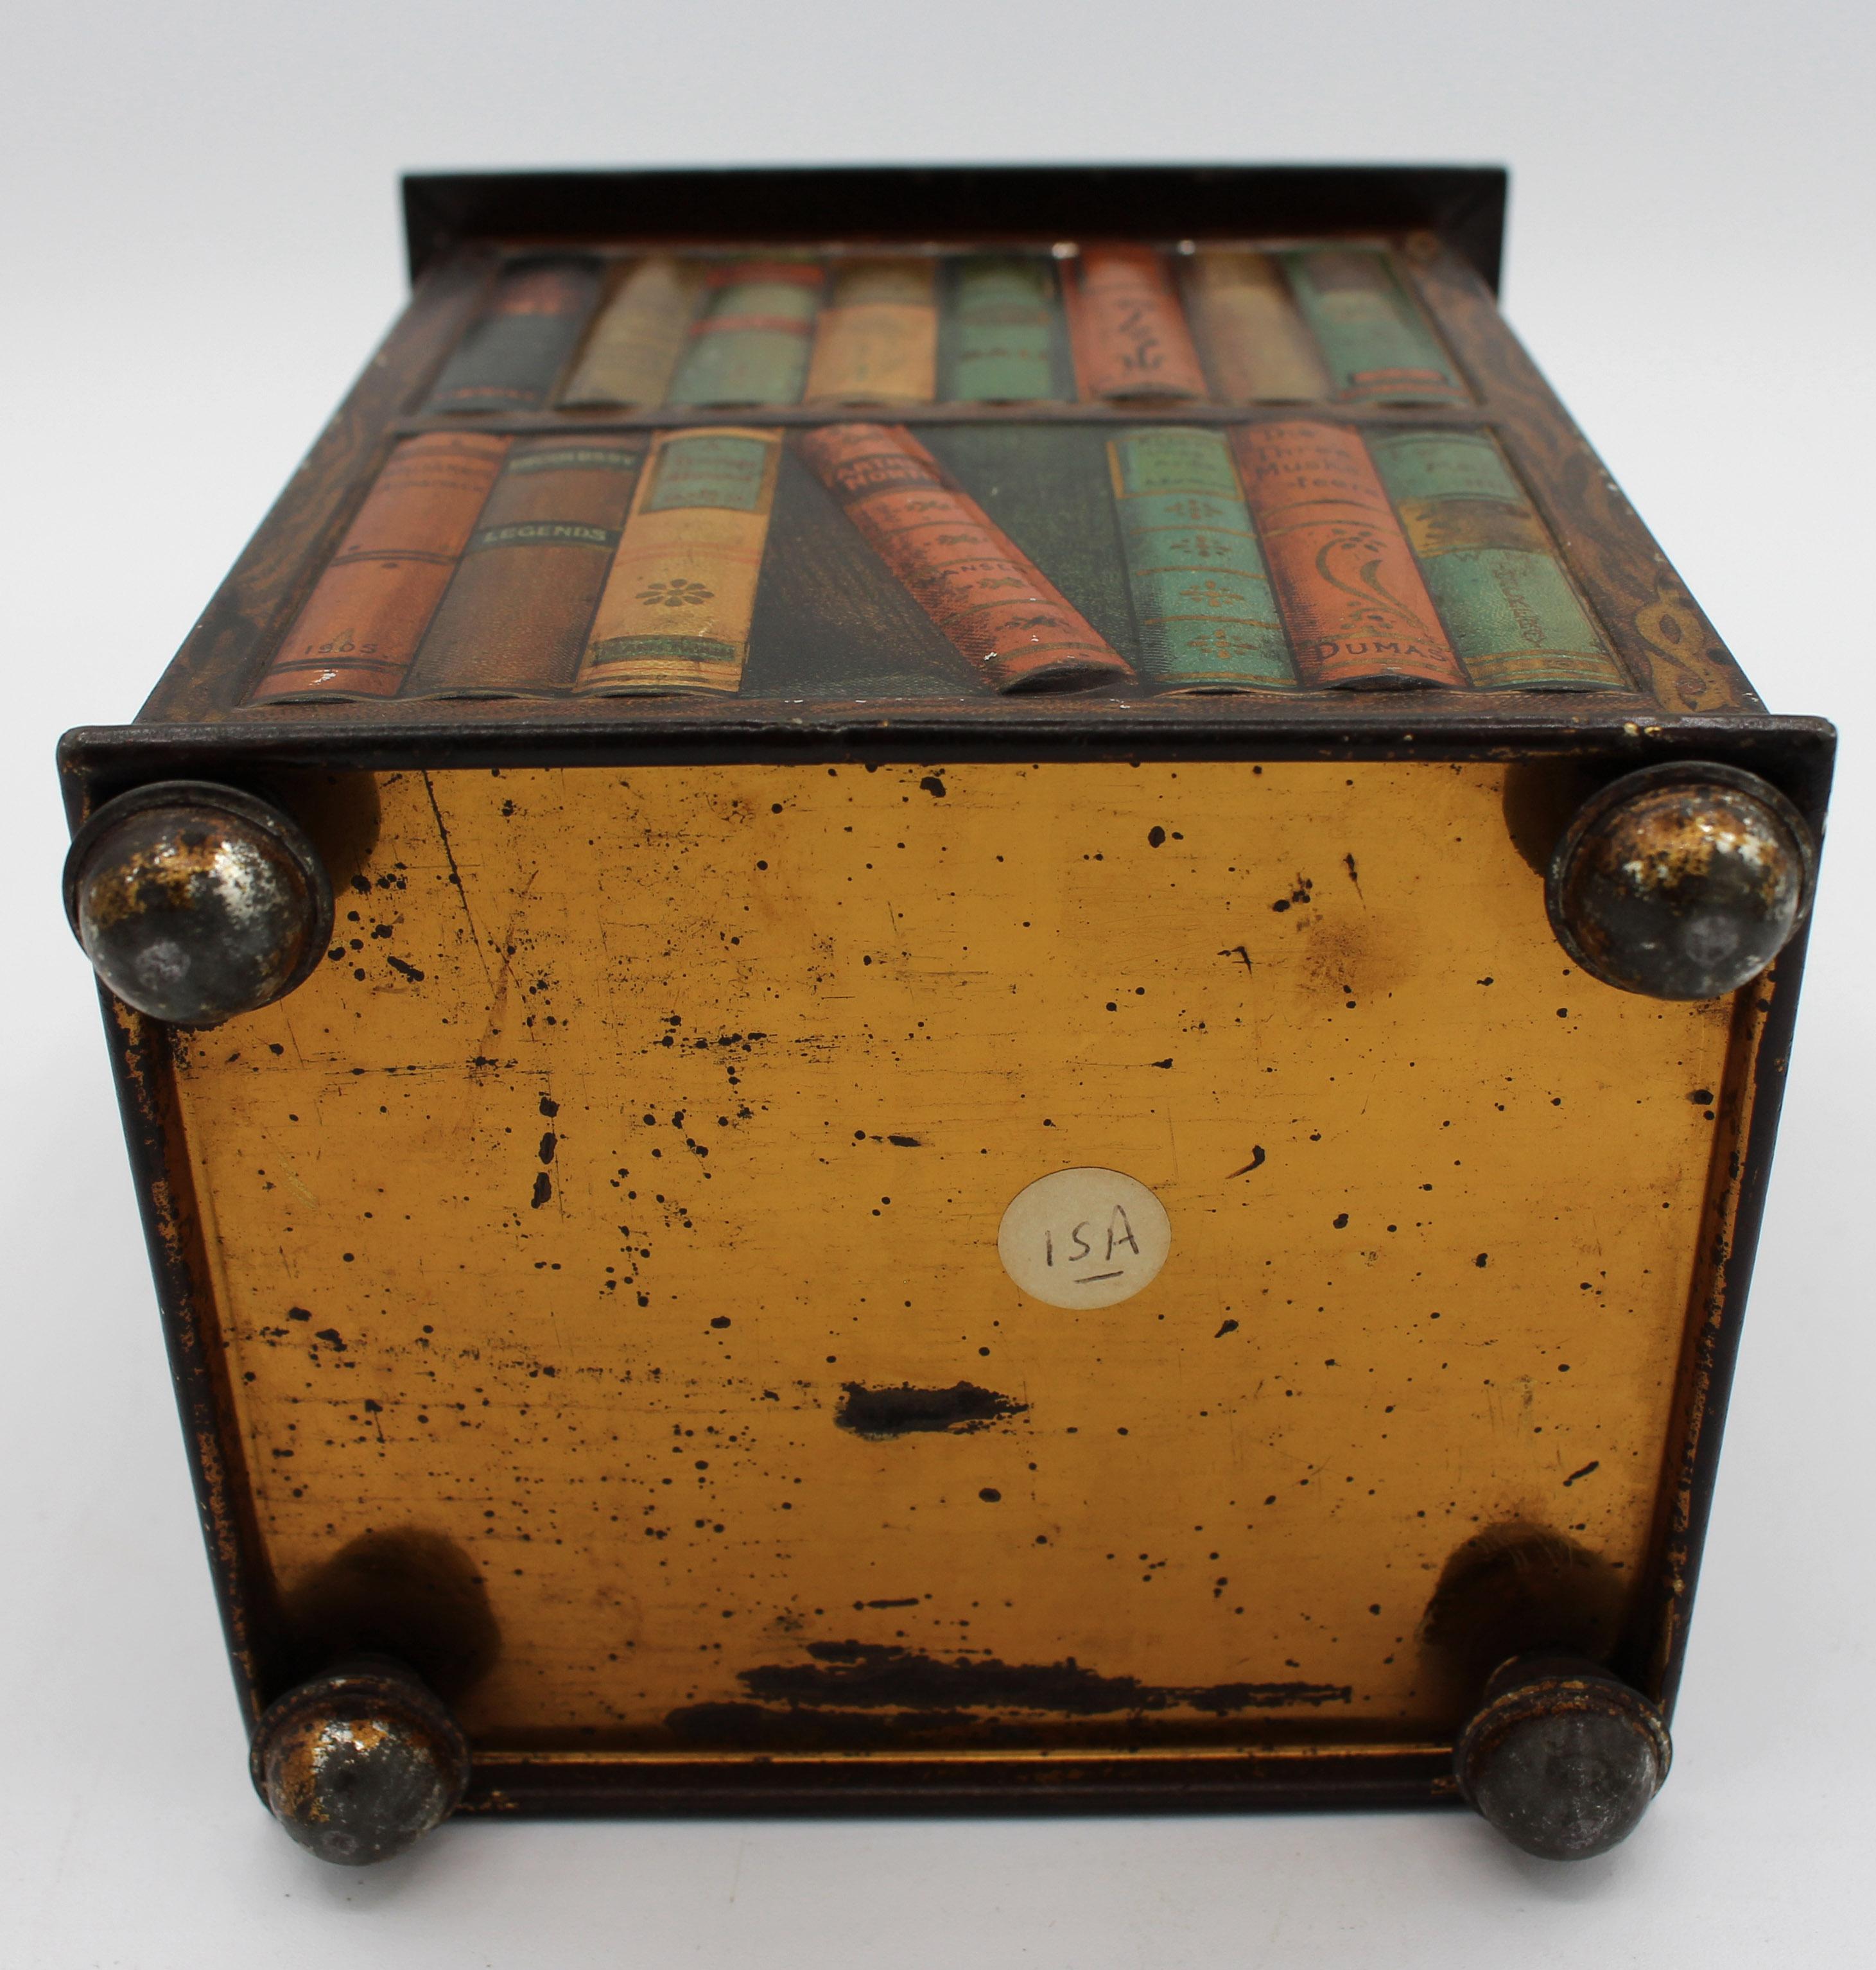 Faux Revolving Bookcase Biscuit Tin Box by Huntley & Palmers, 1905, English For Sale 3